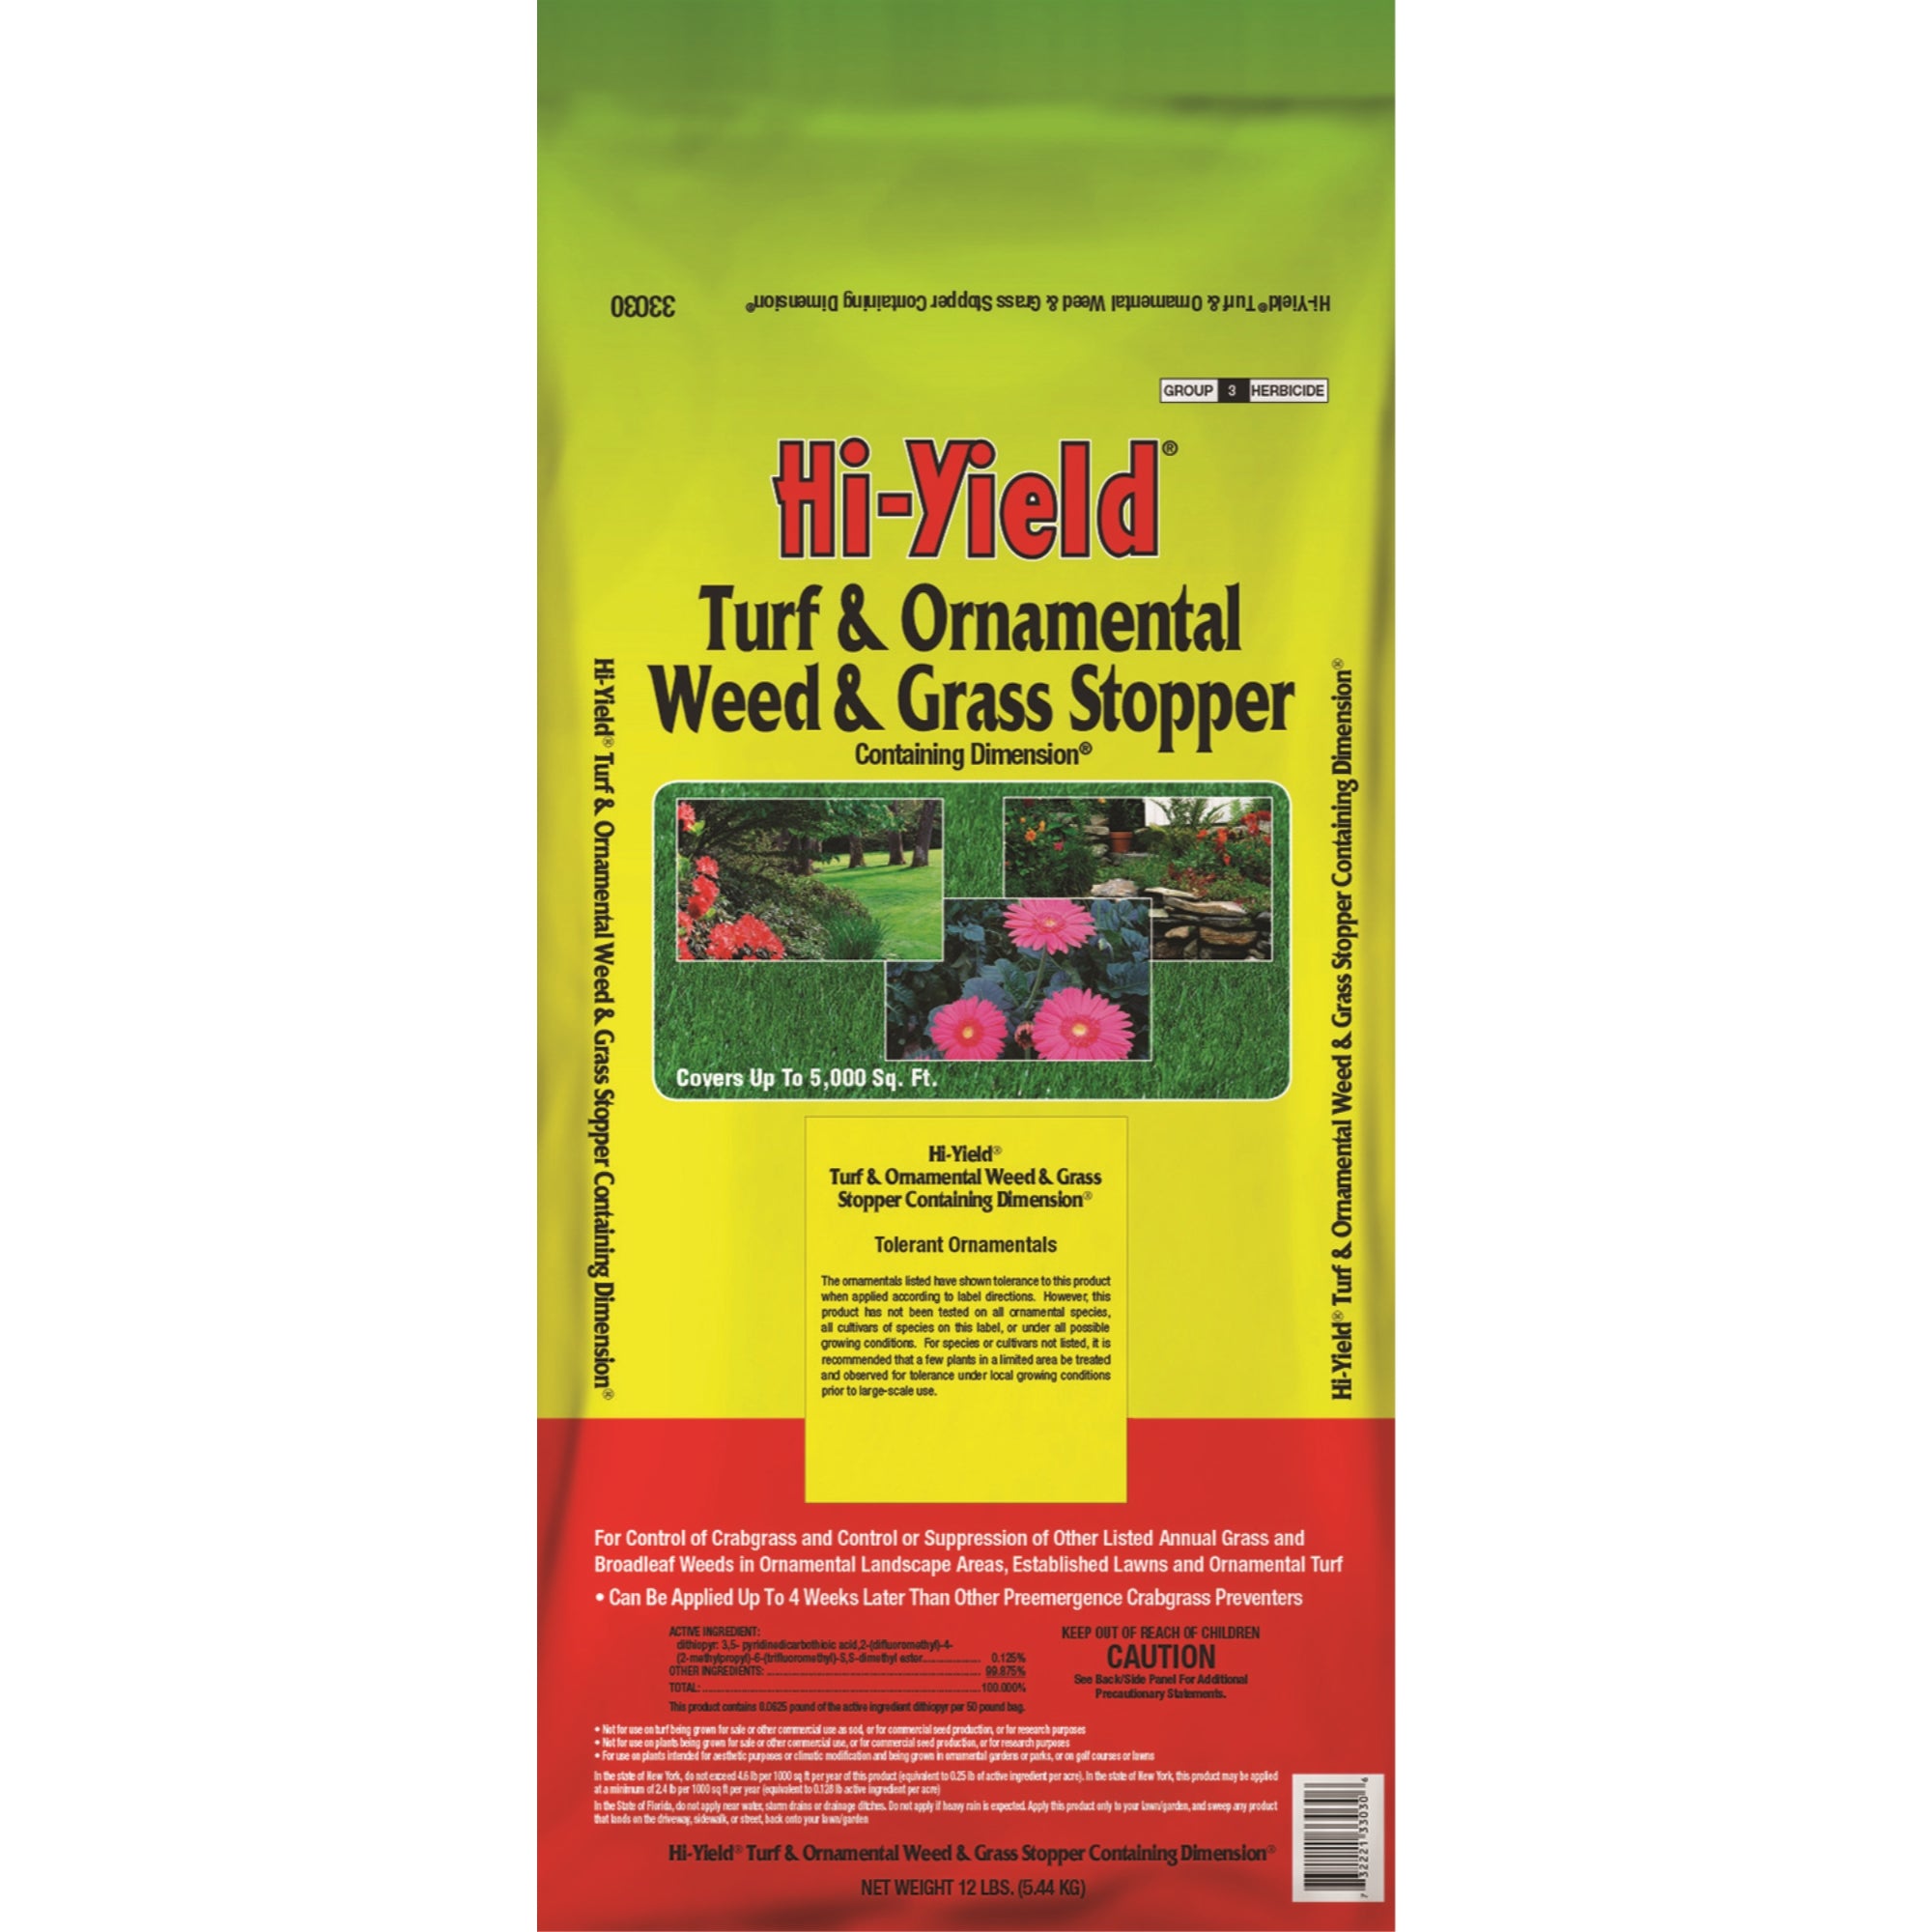 HI-Yield Turf and Ornamental Weed and Grass Stopper with Dimension